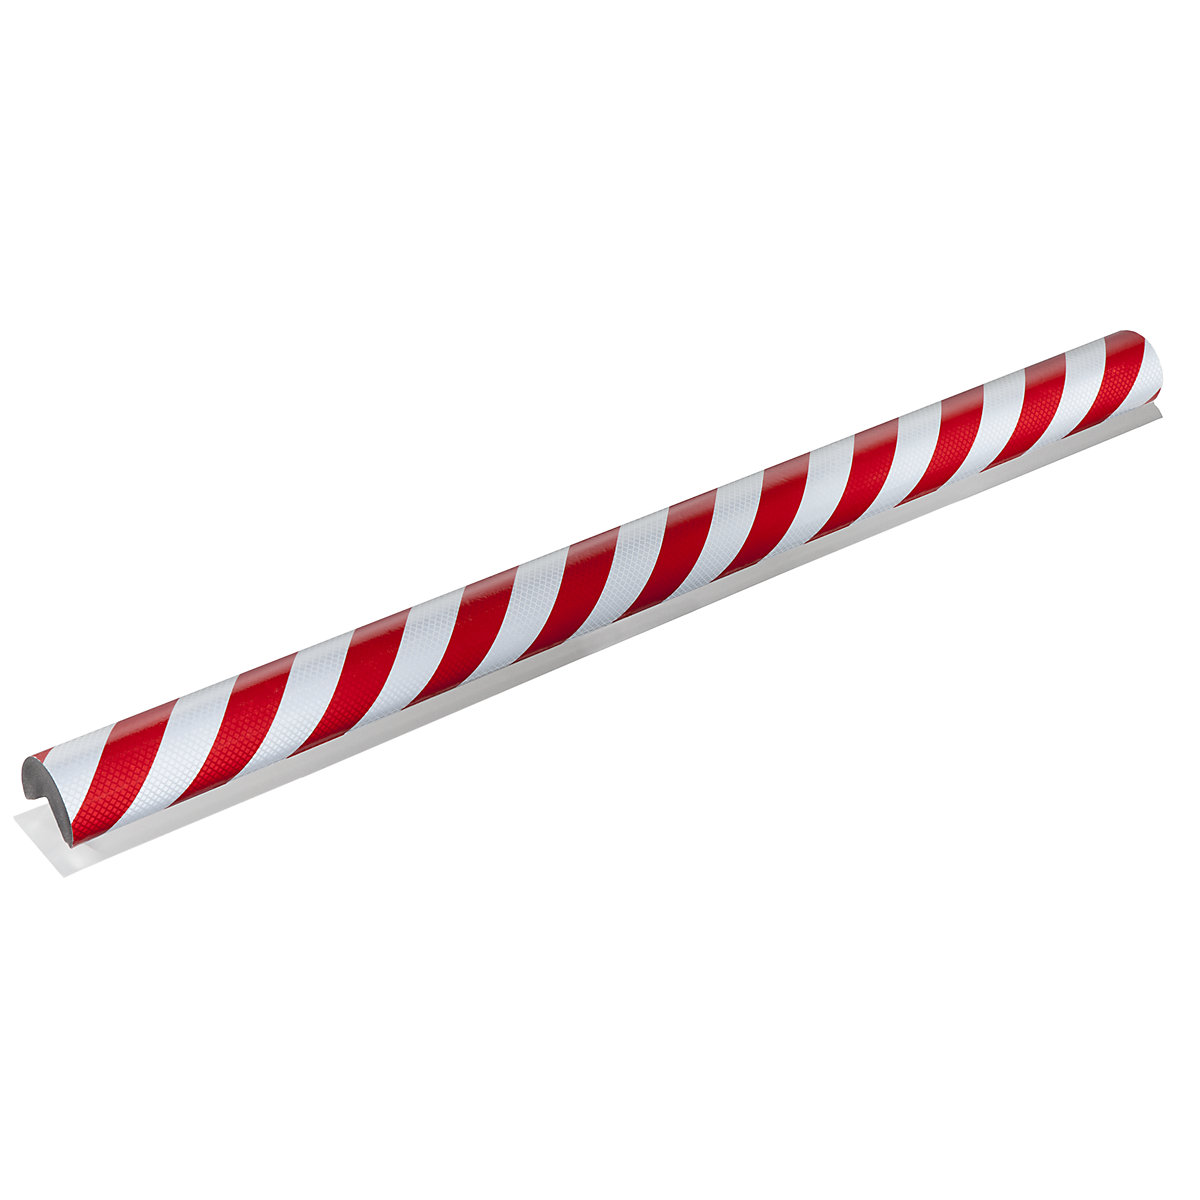 Knuffi® corner protection – SHG, type A+, 1 m piece, red / white reflective-10